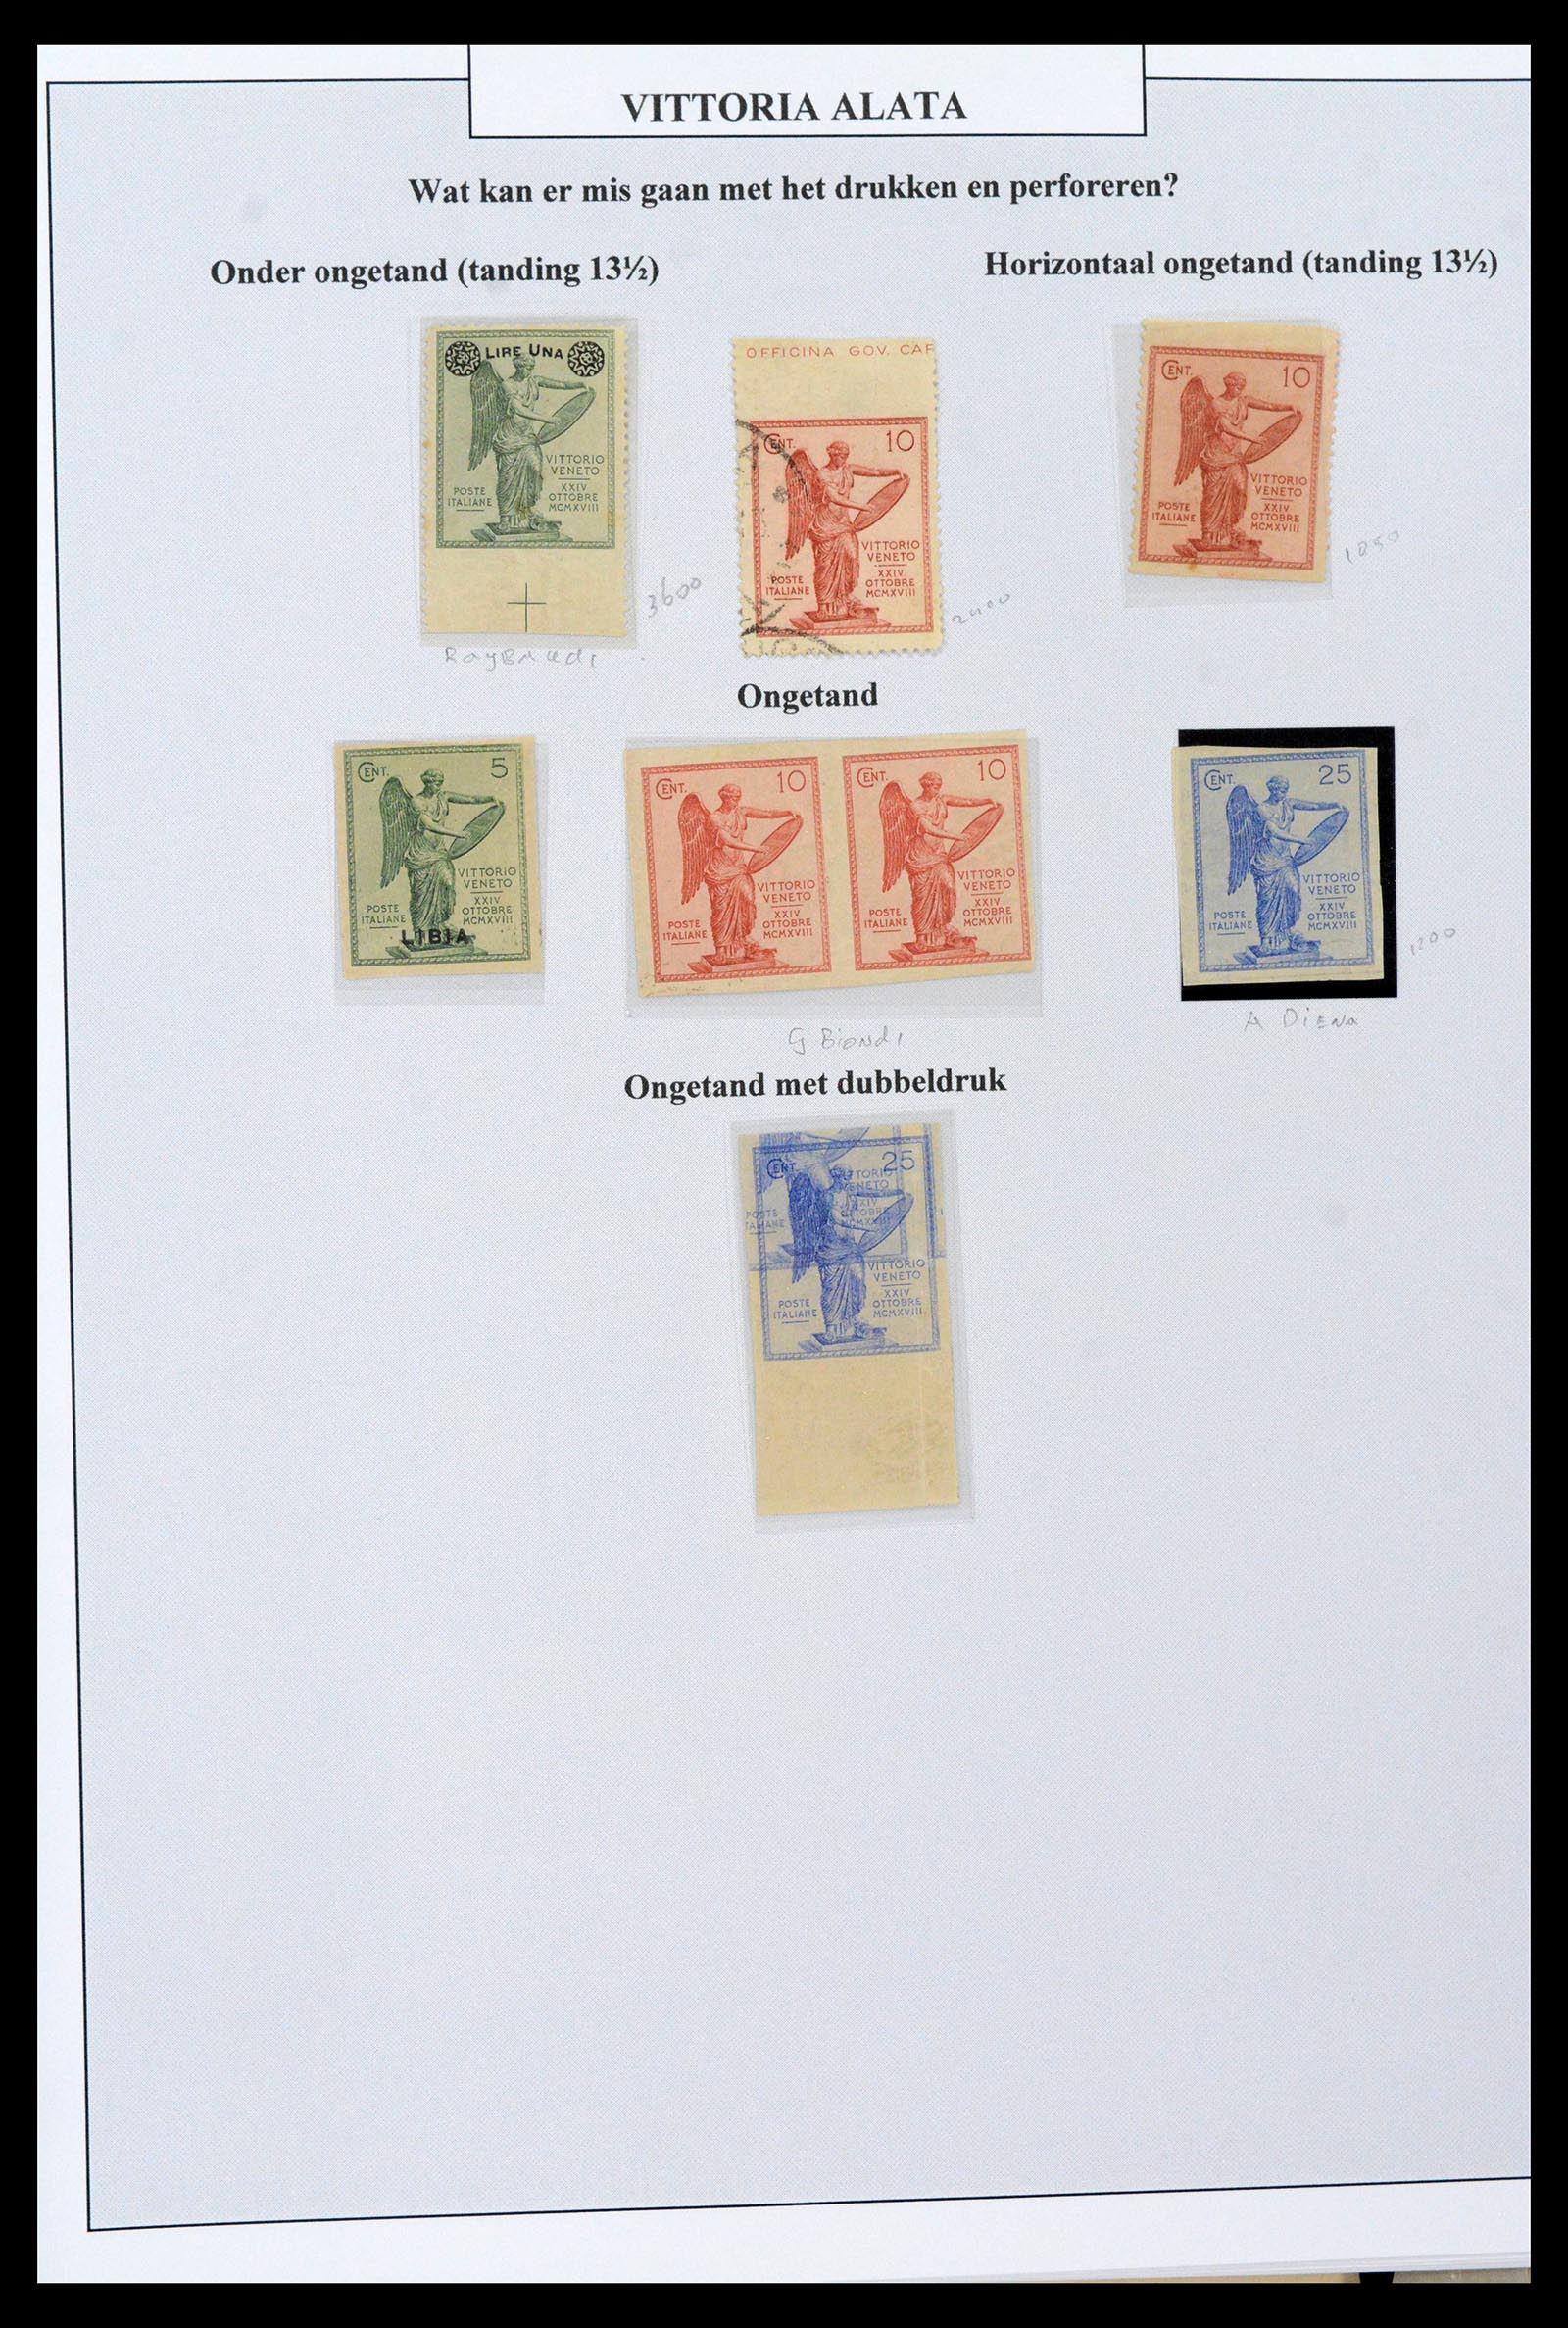 38515 0054 - Stamp collection 38515 Italy and colonies special collection Vittorio 19